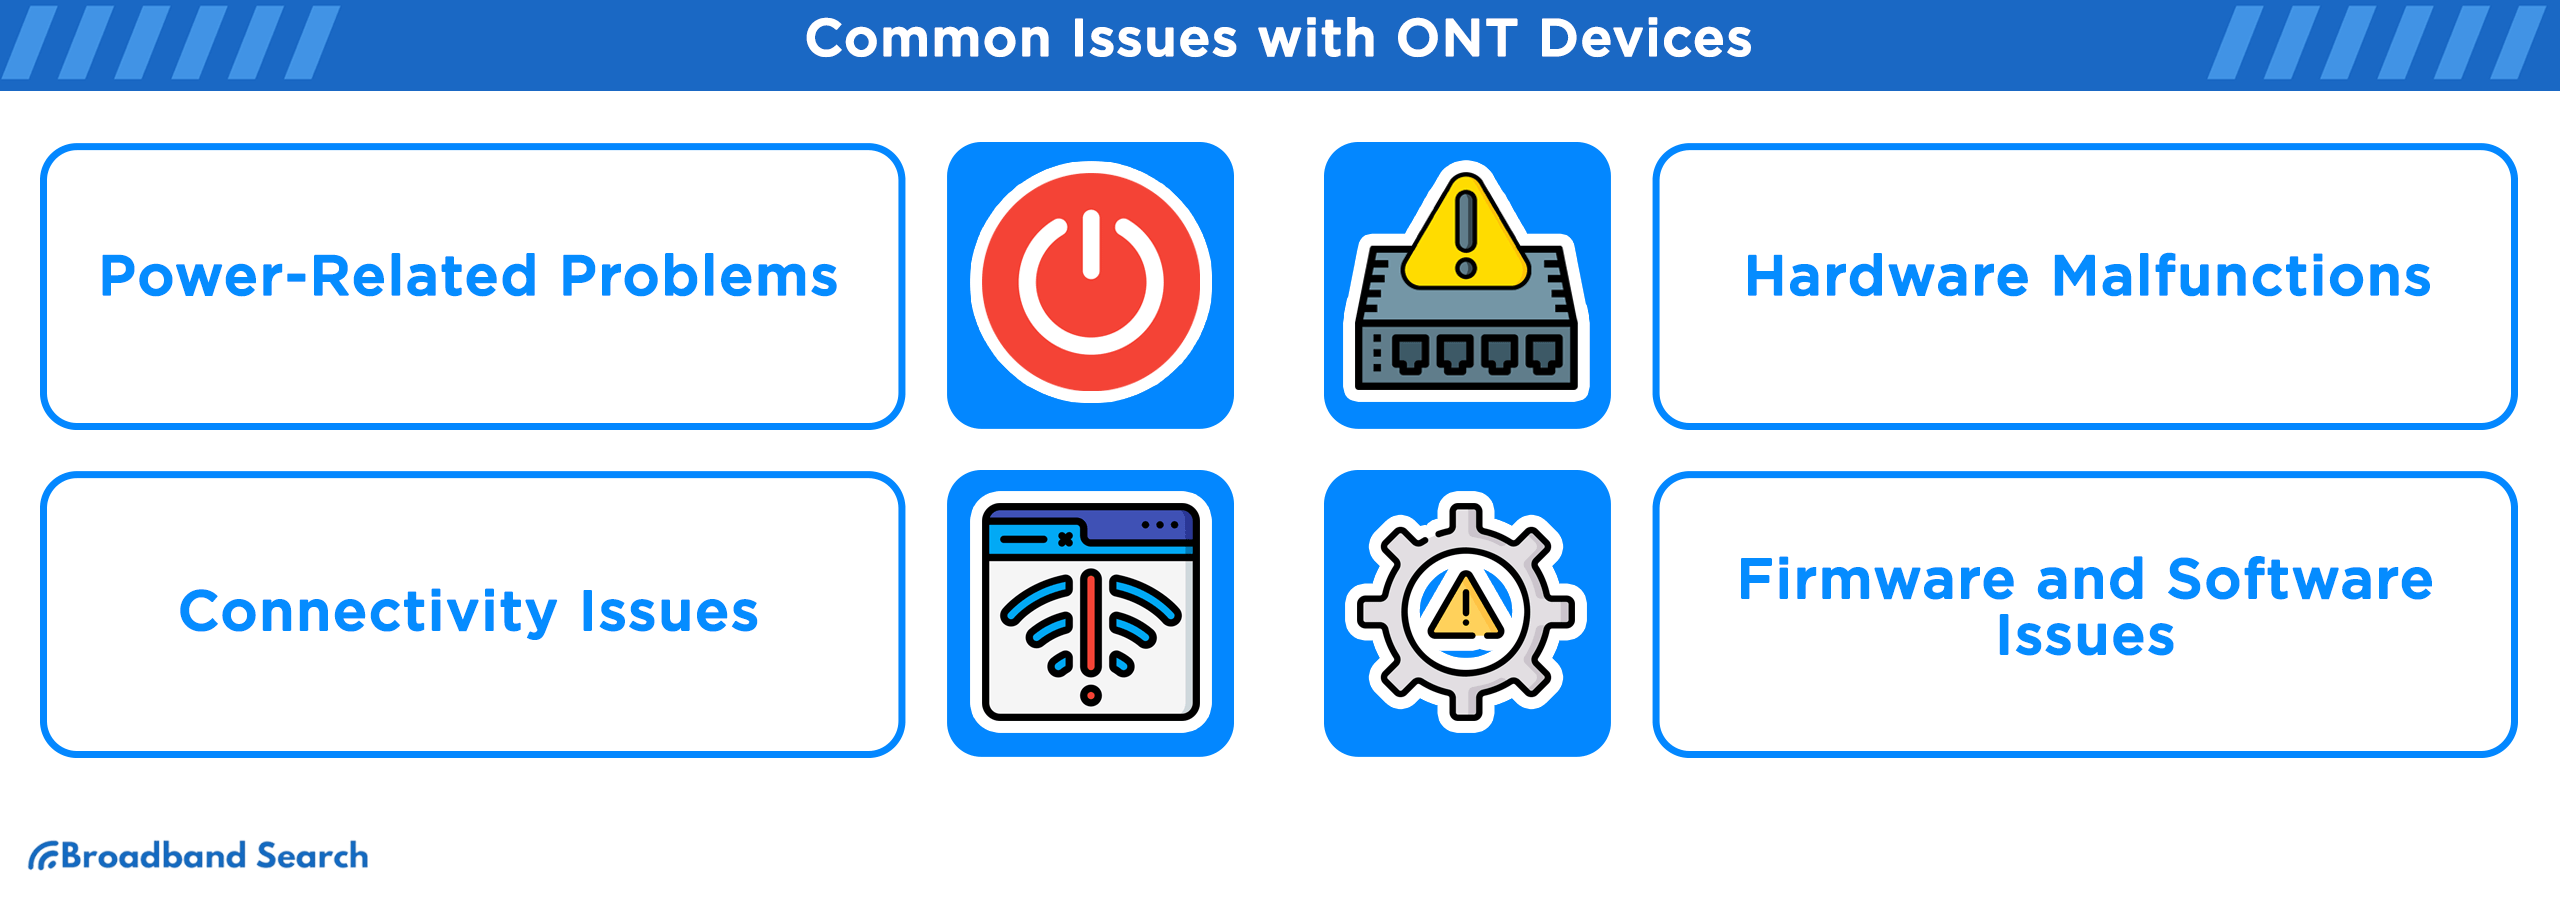 Common Issues with ONT devices